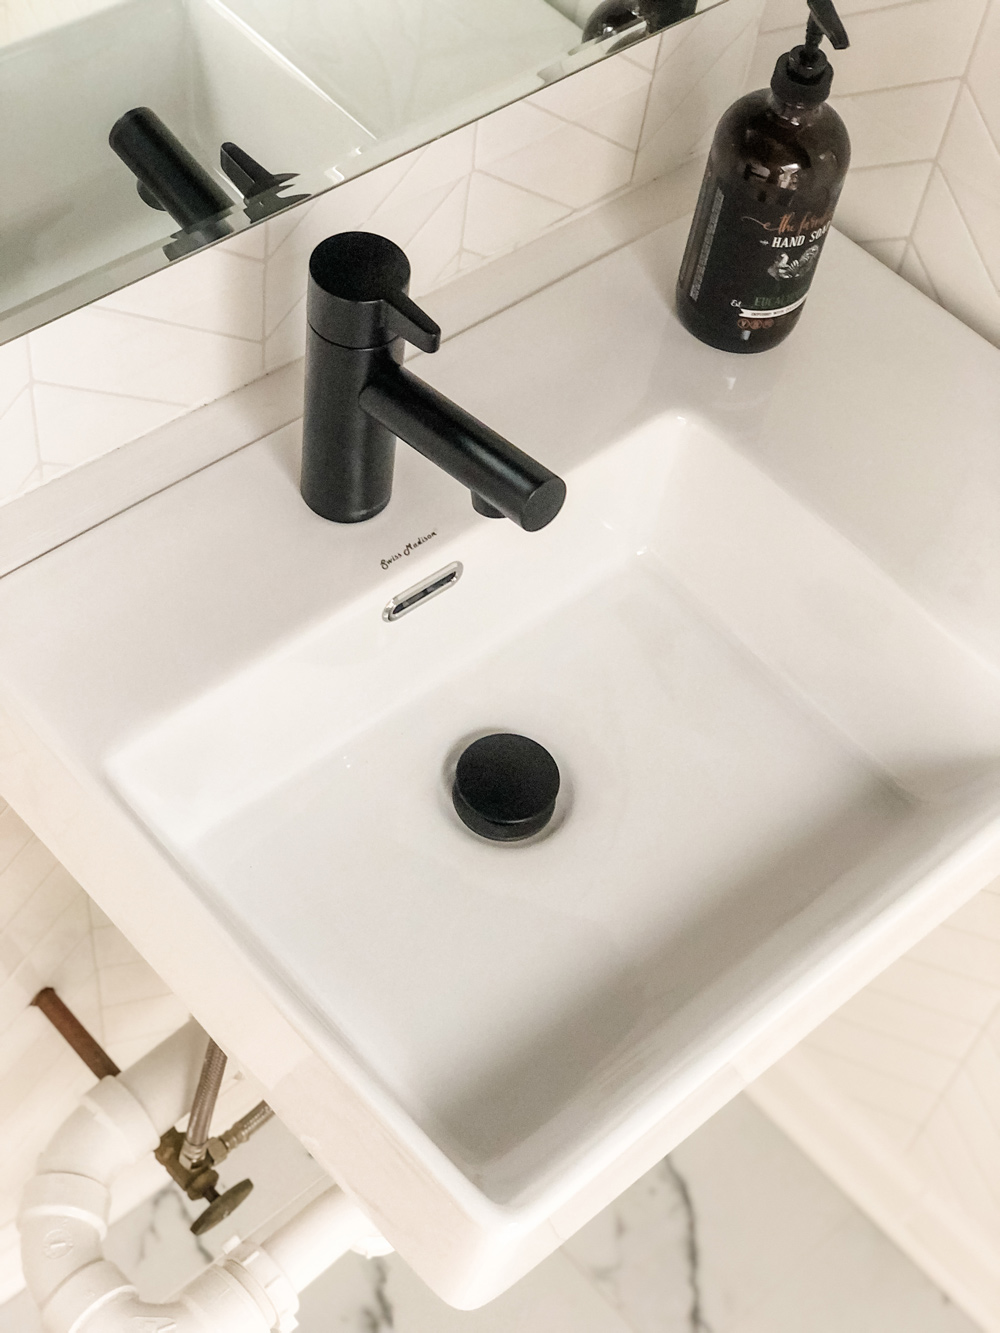 White vessel sink with black touchless faucet.